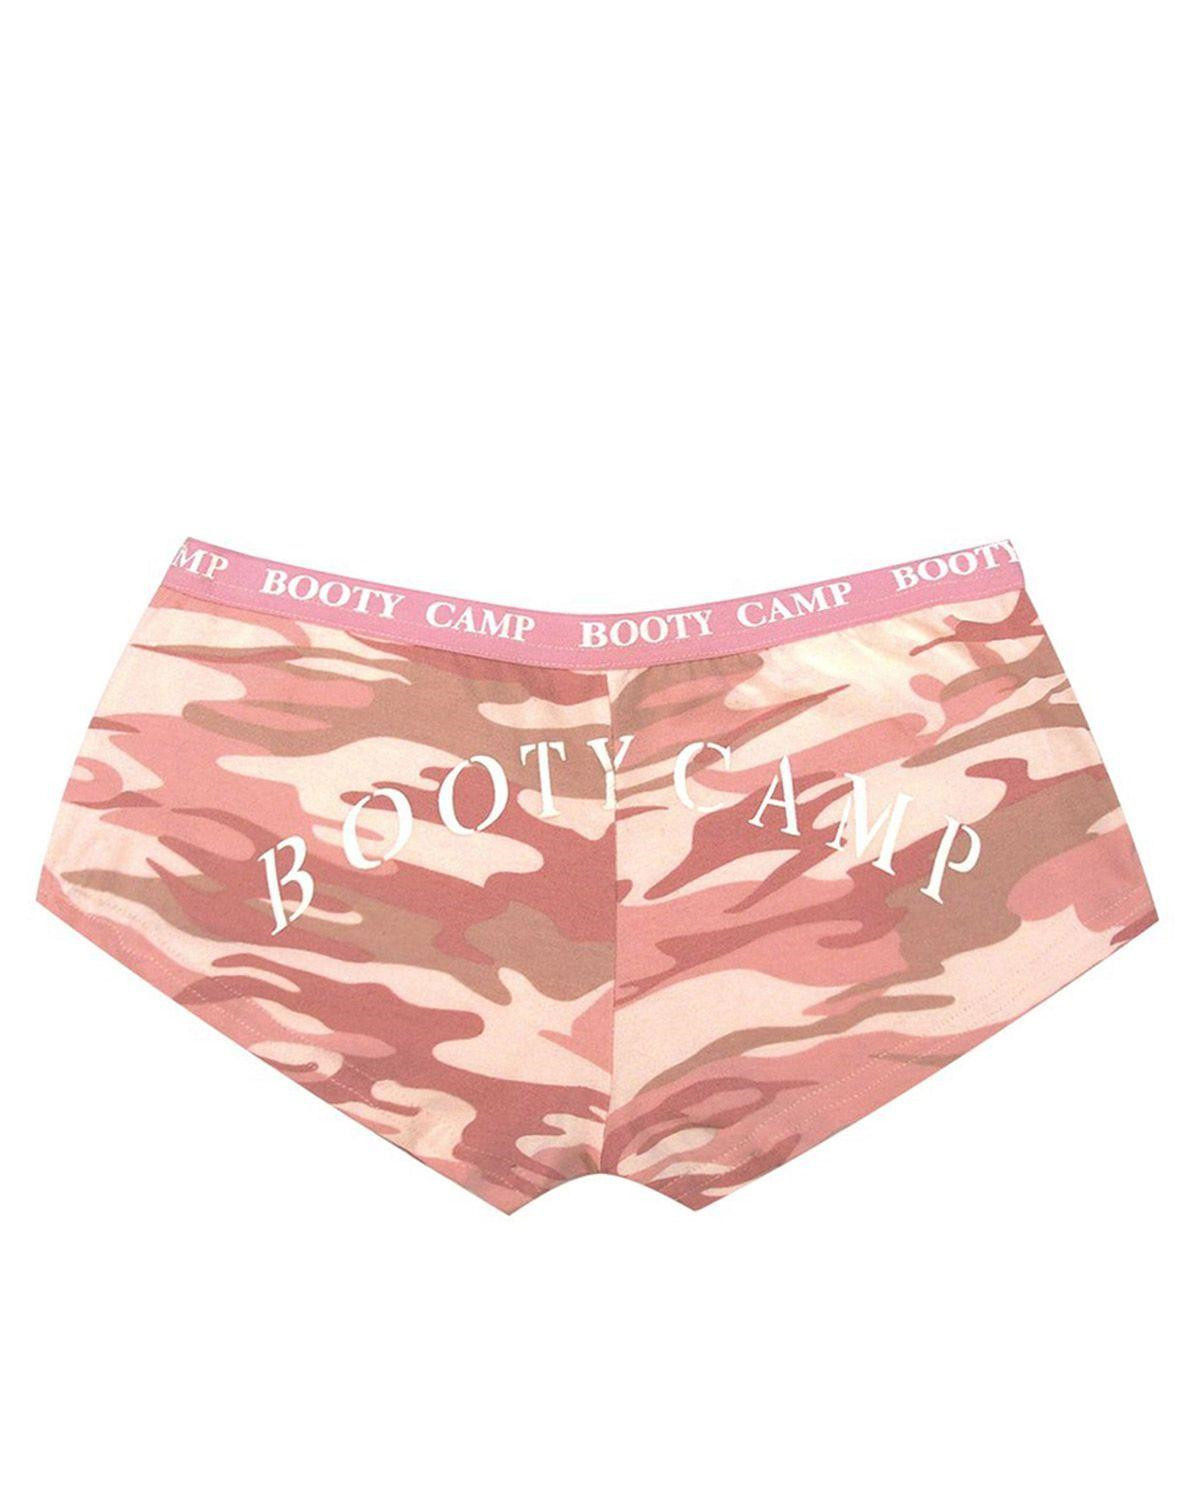 12: Rothco Trusser - 'Booty Camp' (Pink Camo, XL)